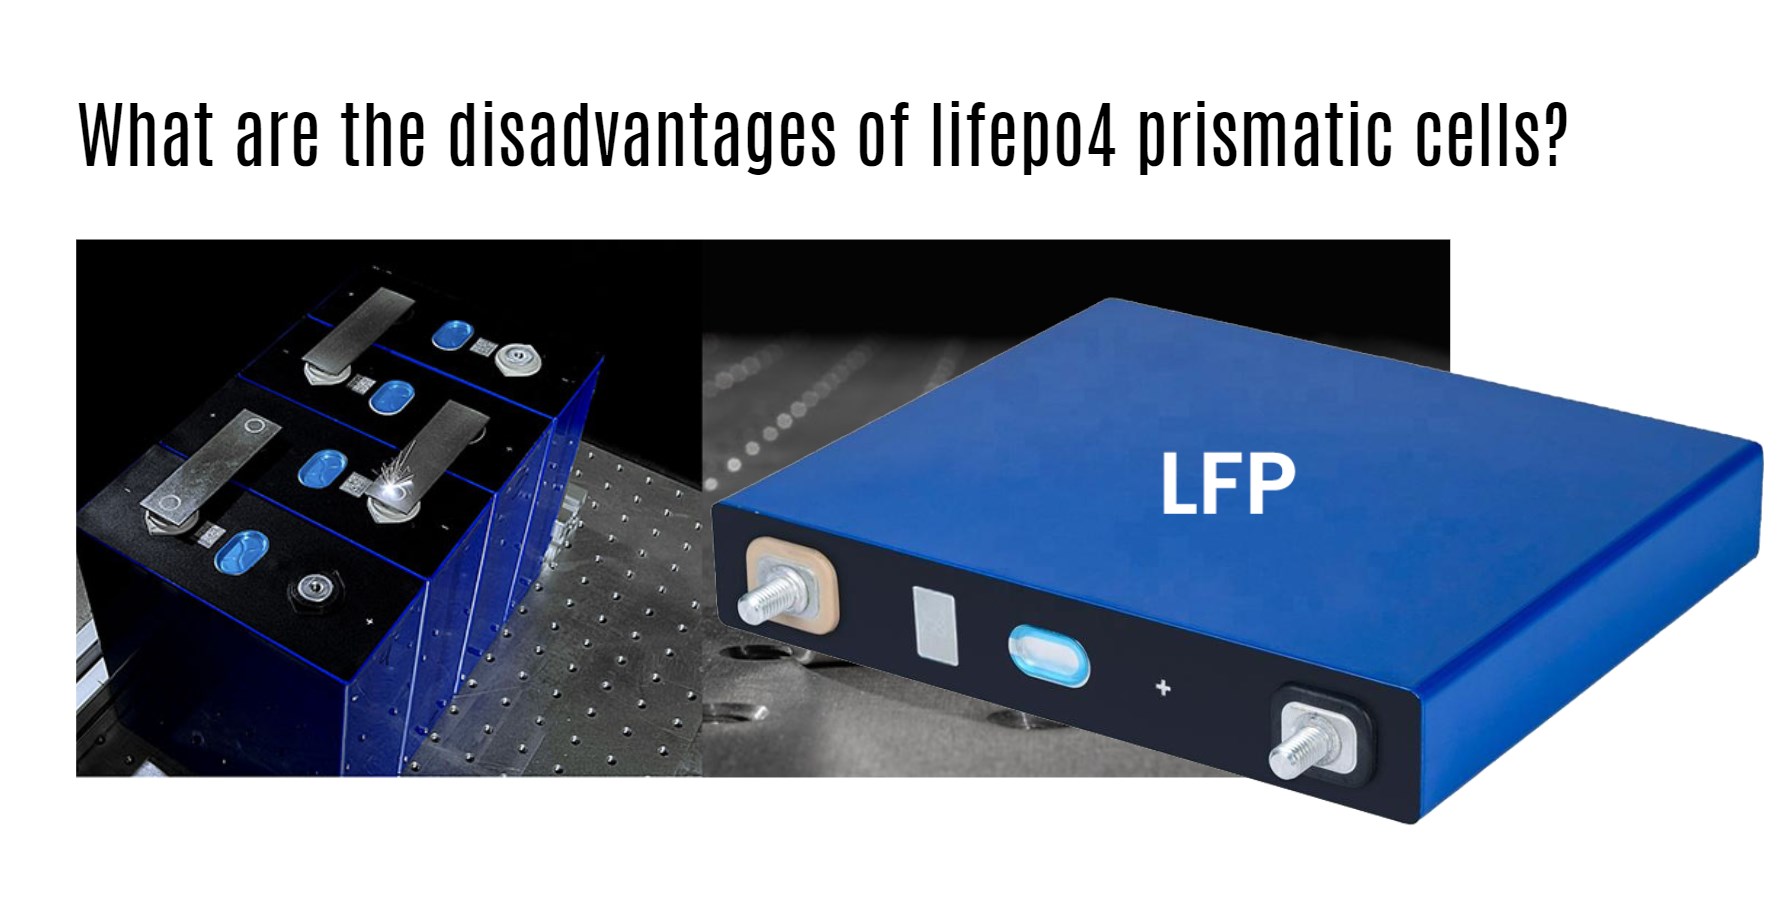 What are the disadvantages of lifepo4 prismatic cells?